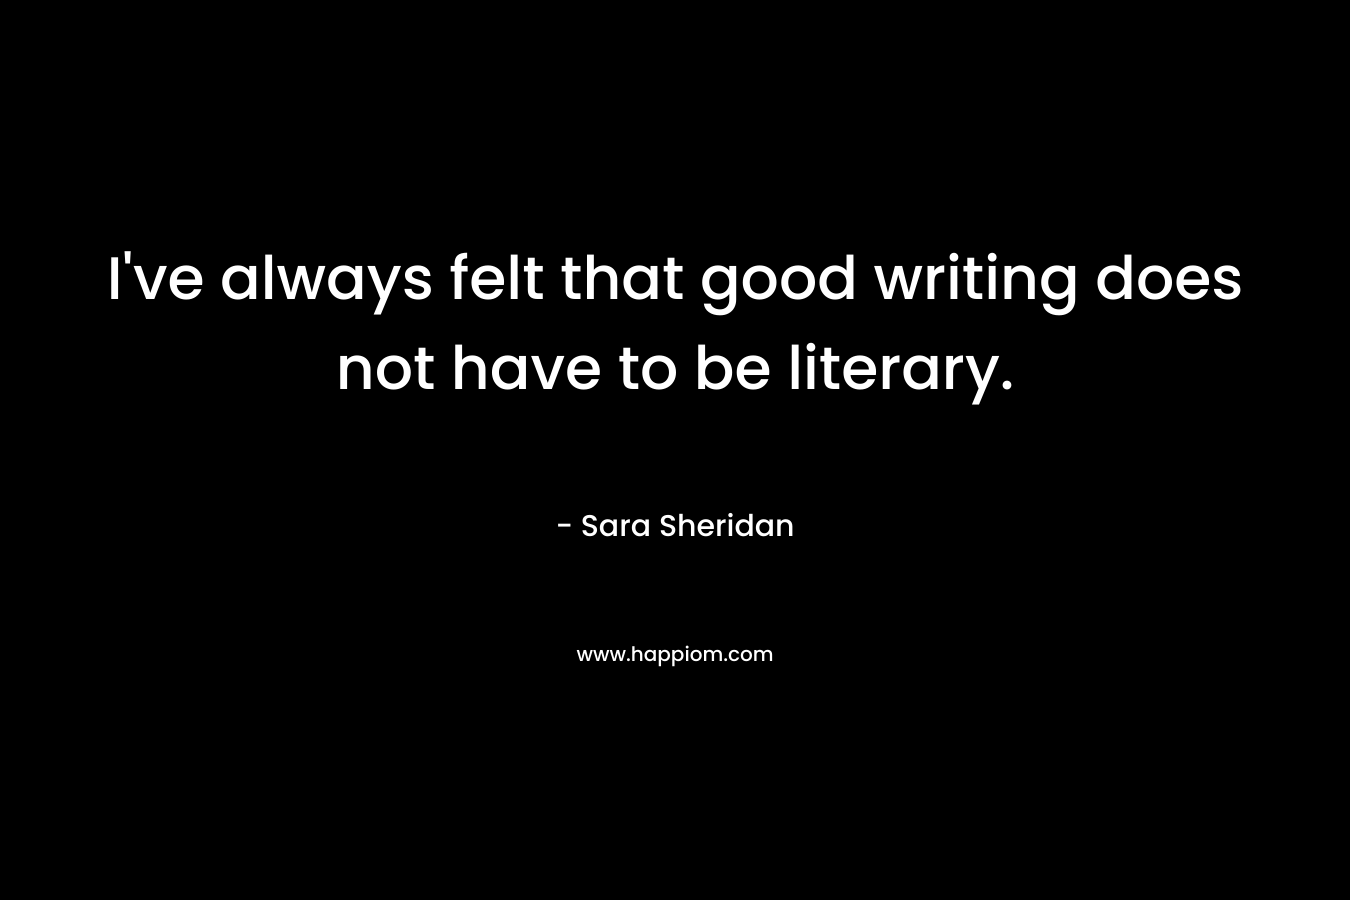 I've always felt that good writing does not have to be literary.